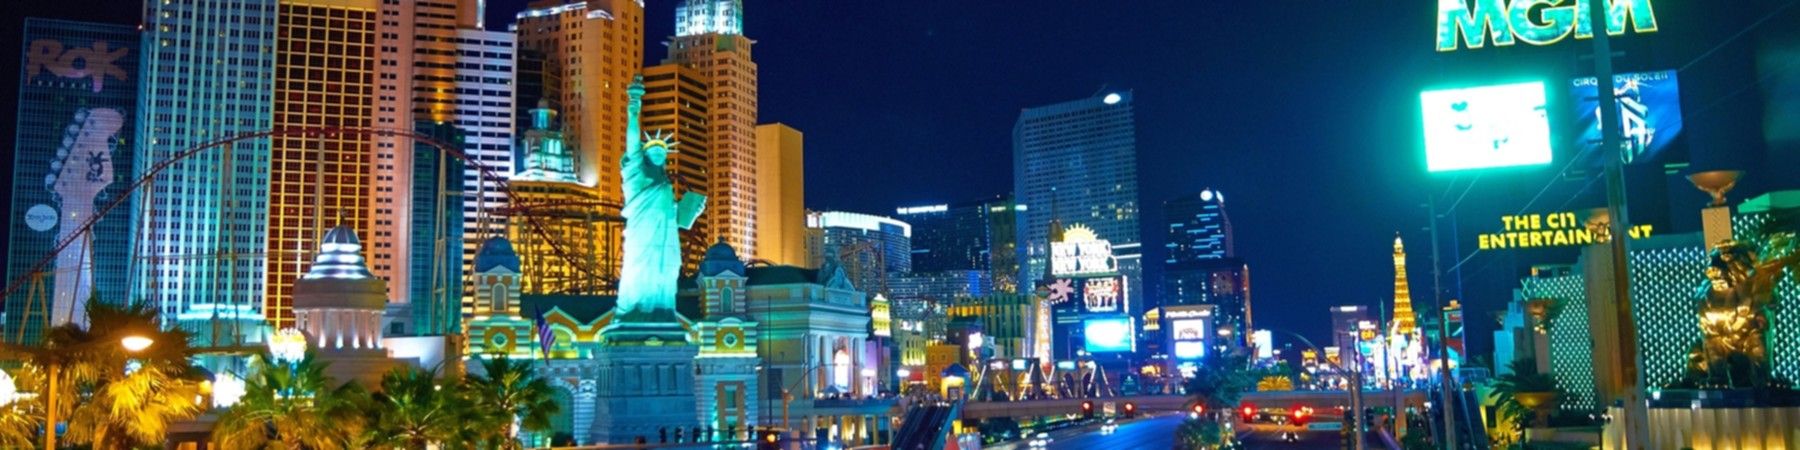 Troubleshoot reccomend Map of las vegas strip that includes shows